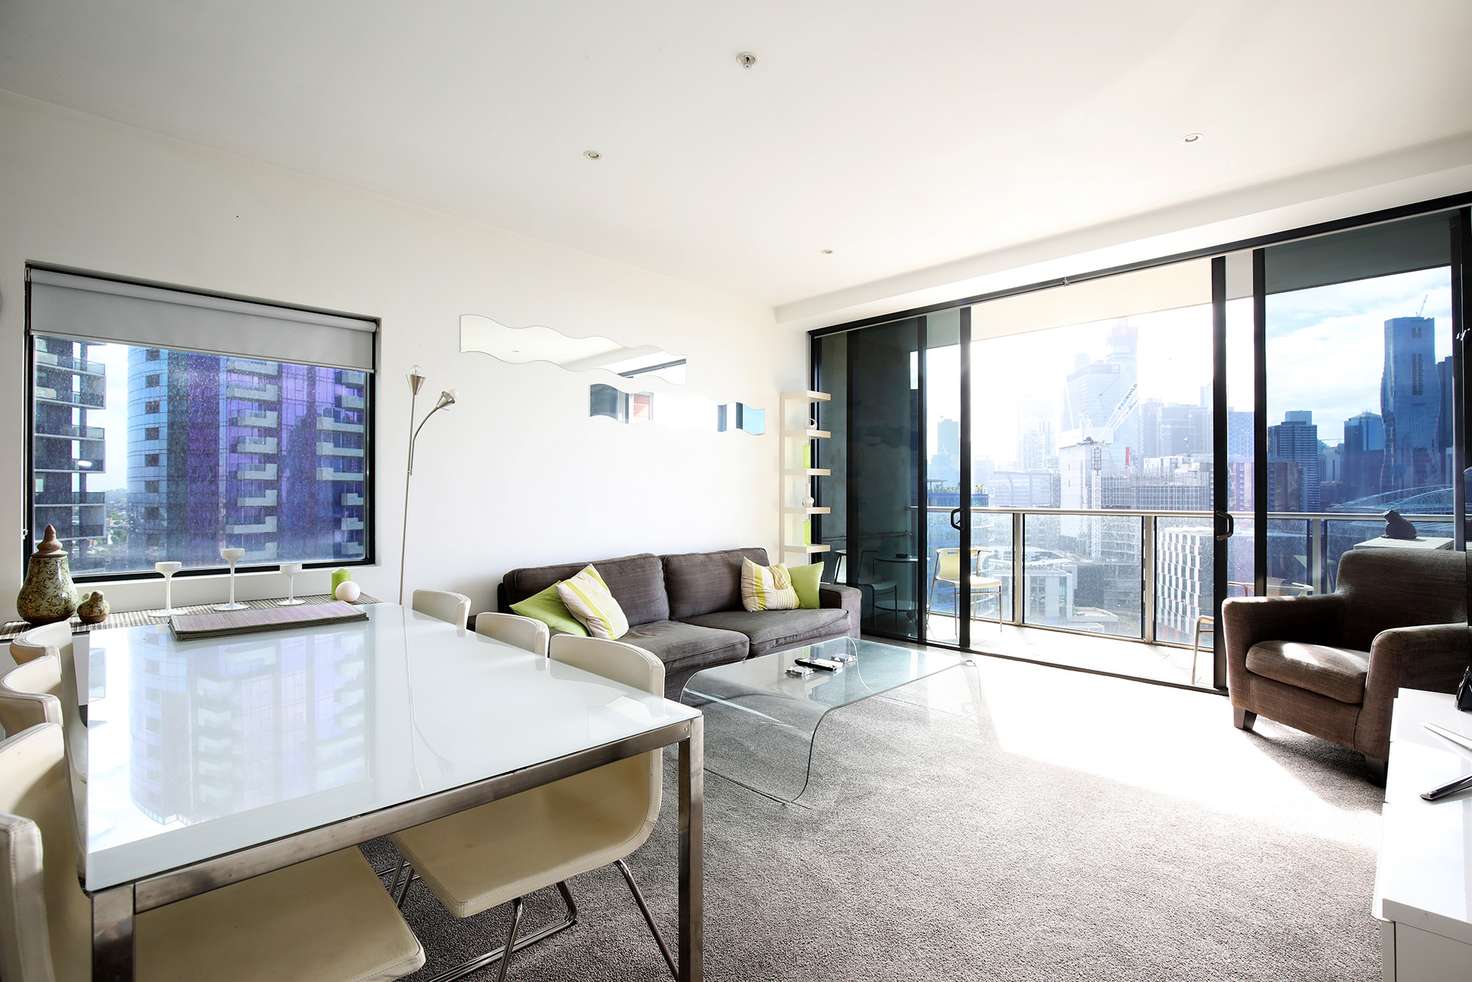 Main view of Homely apartment listing, 1605/5 Caravel Lane, Docklands VIC 3008